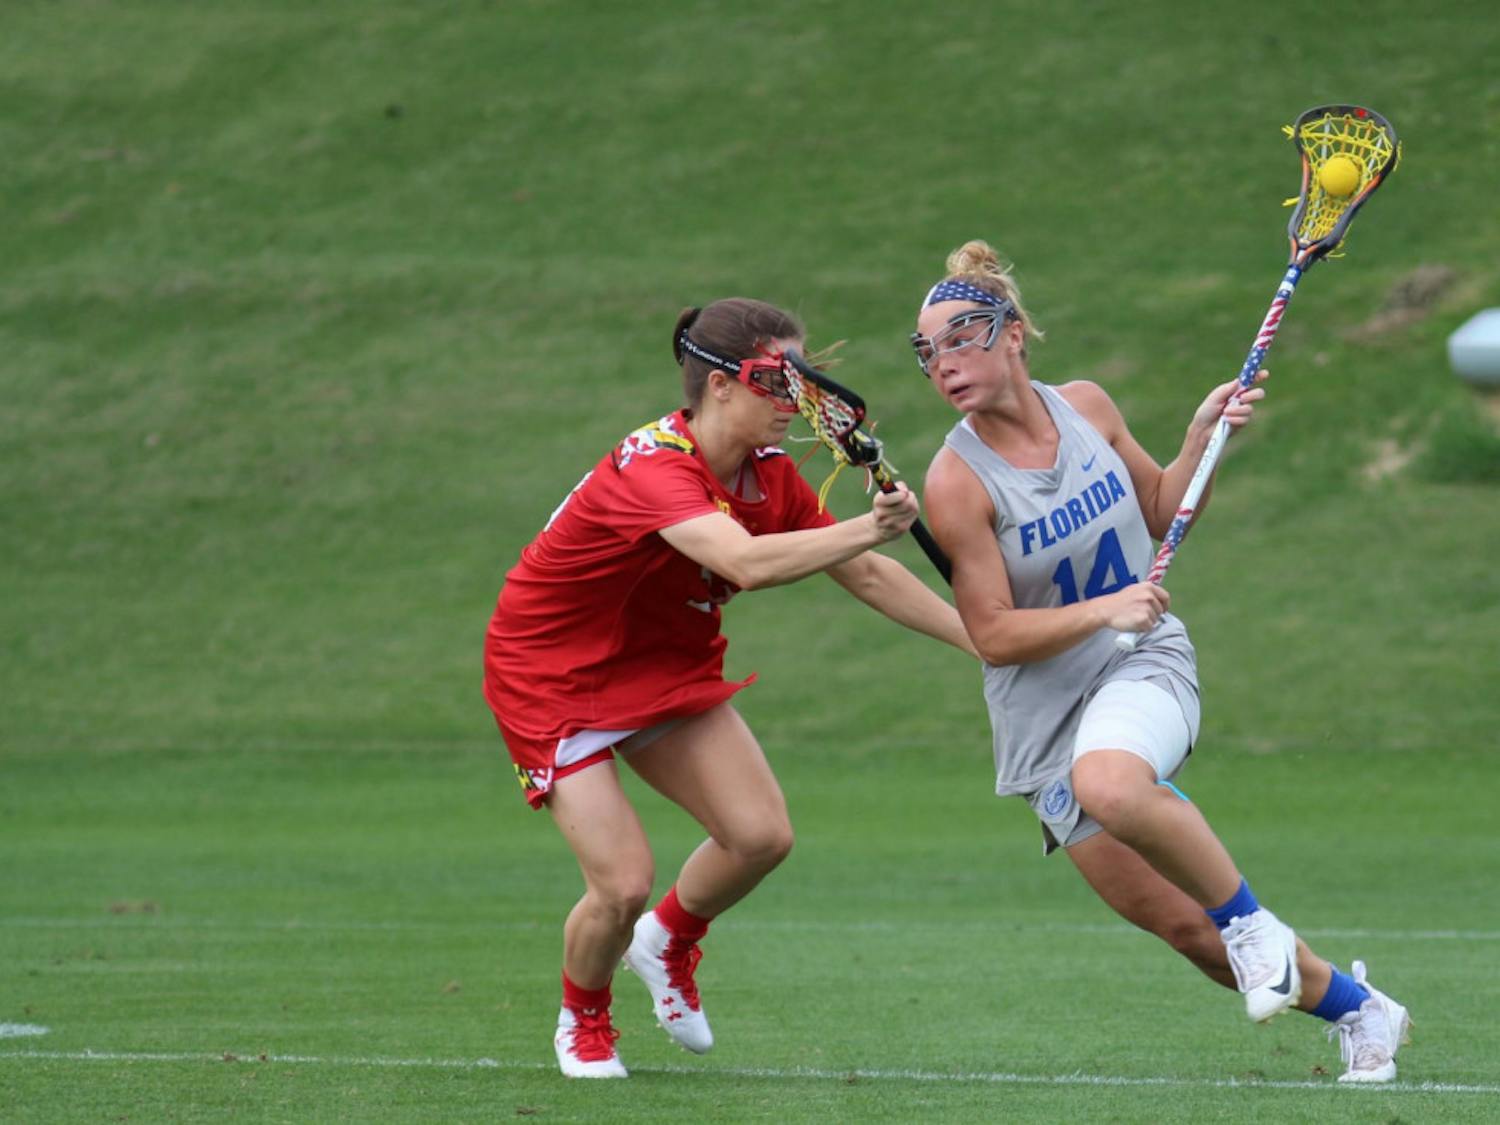 Senior attacker Lindsey Ronbeck has recorded 15 goals in the last two contests, with seven in the UF lacrosse team's 20-10 victory Saturday over East Carolina.